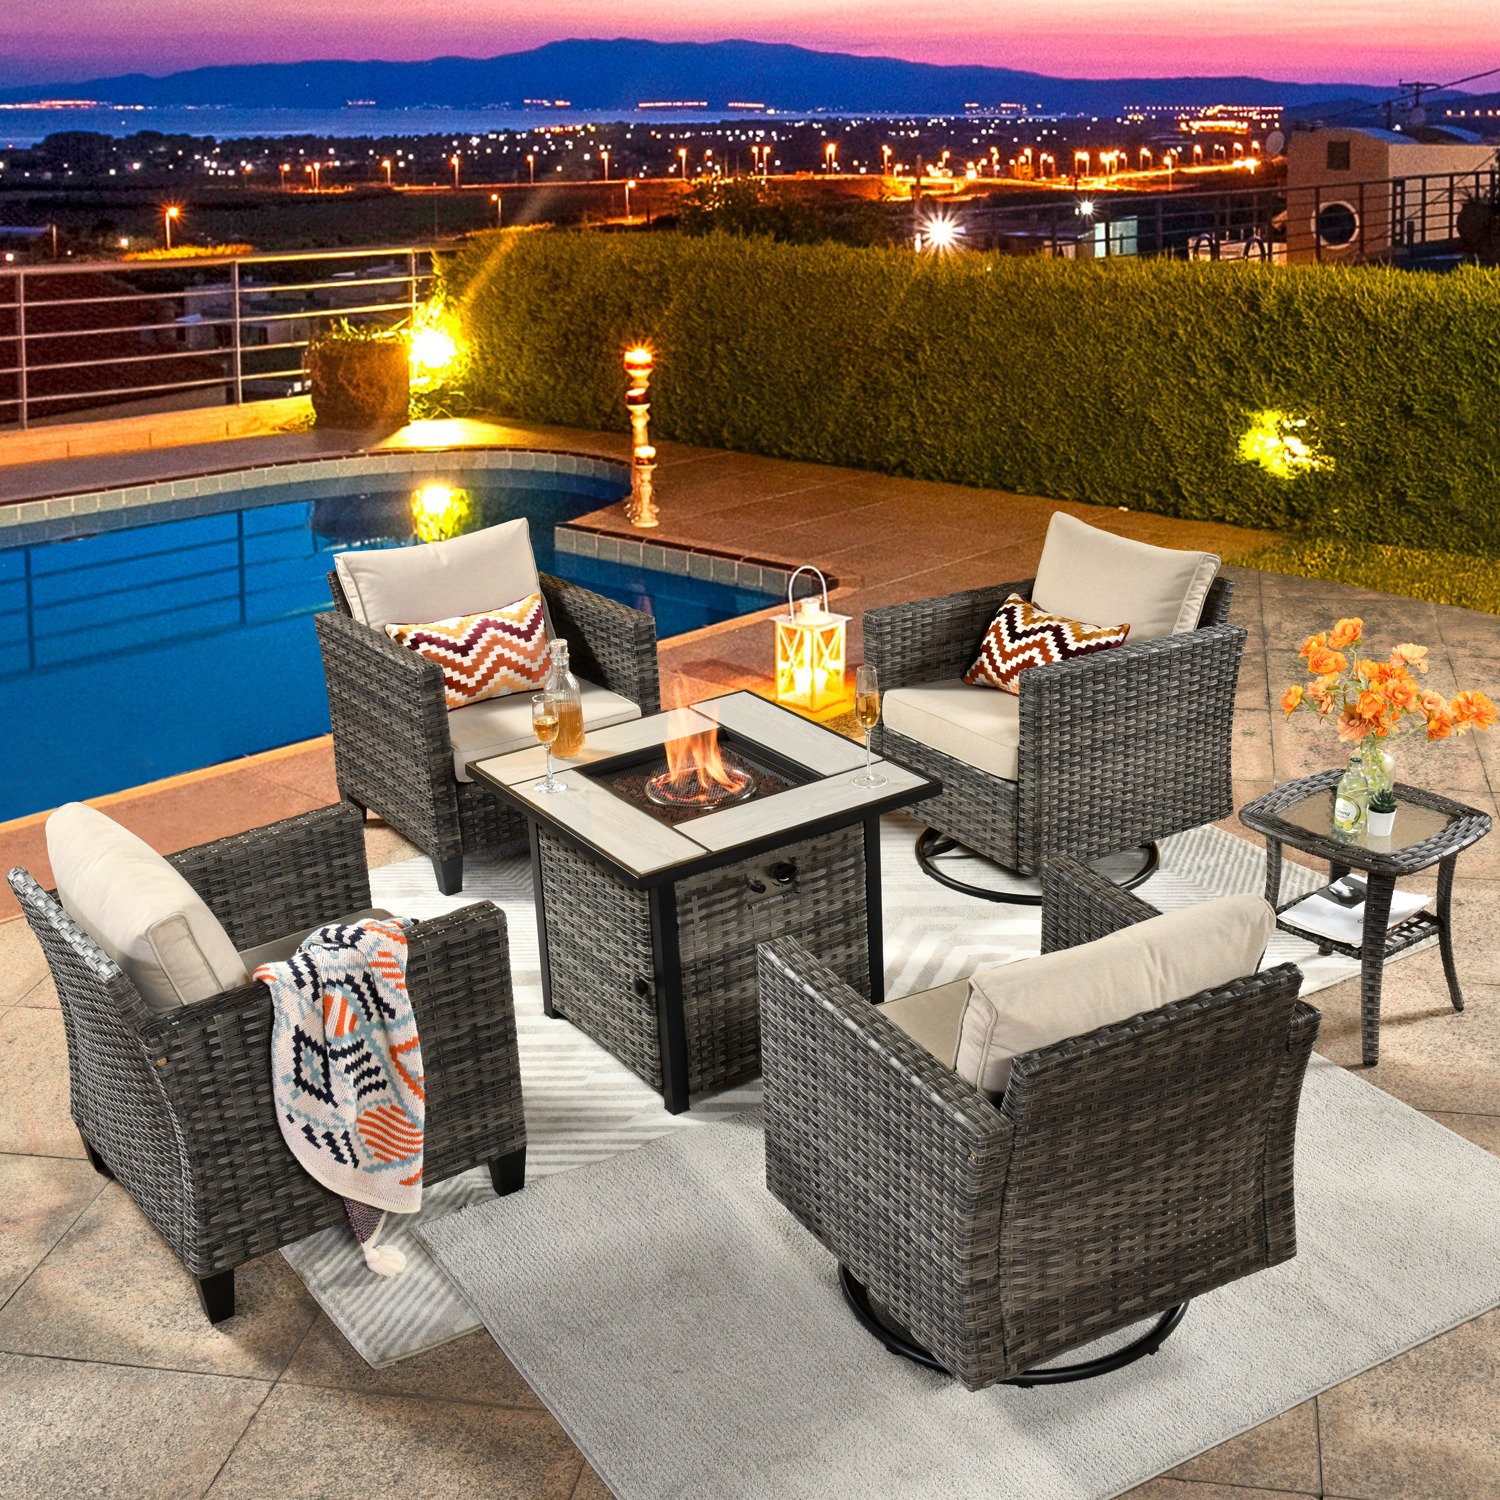 Ovios Patio Outdoor Furniture Set with Fire Pit Table 6 Pieces Outside Wicker Conversation with 360 Degrees Swivel Rocking Chair & Coffee Side Table, Metal, Wicker - image 1 of 9